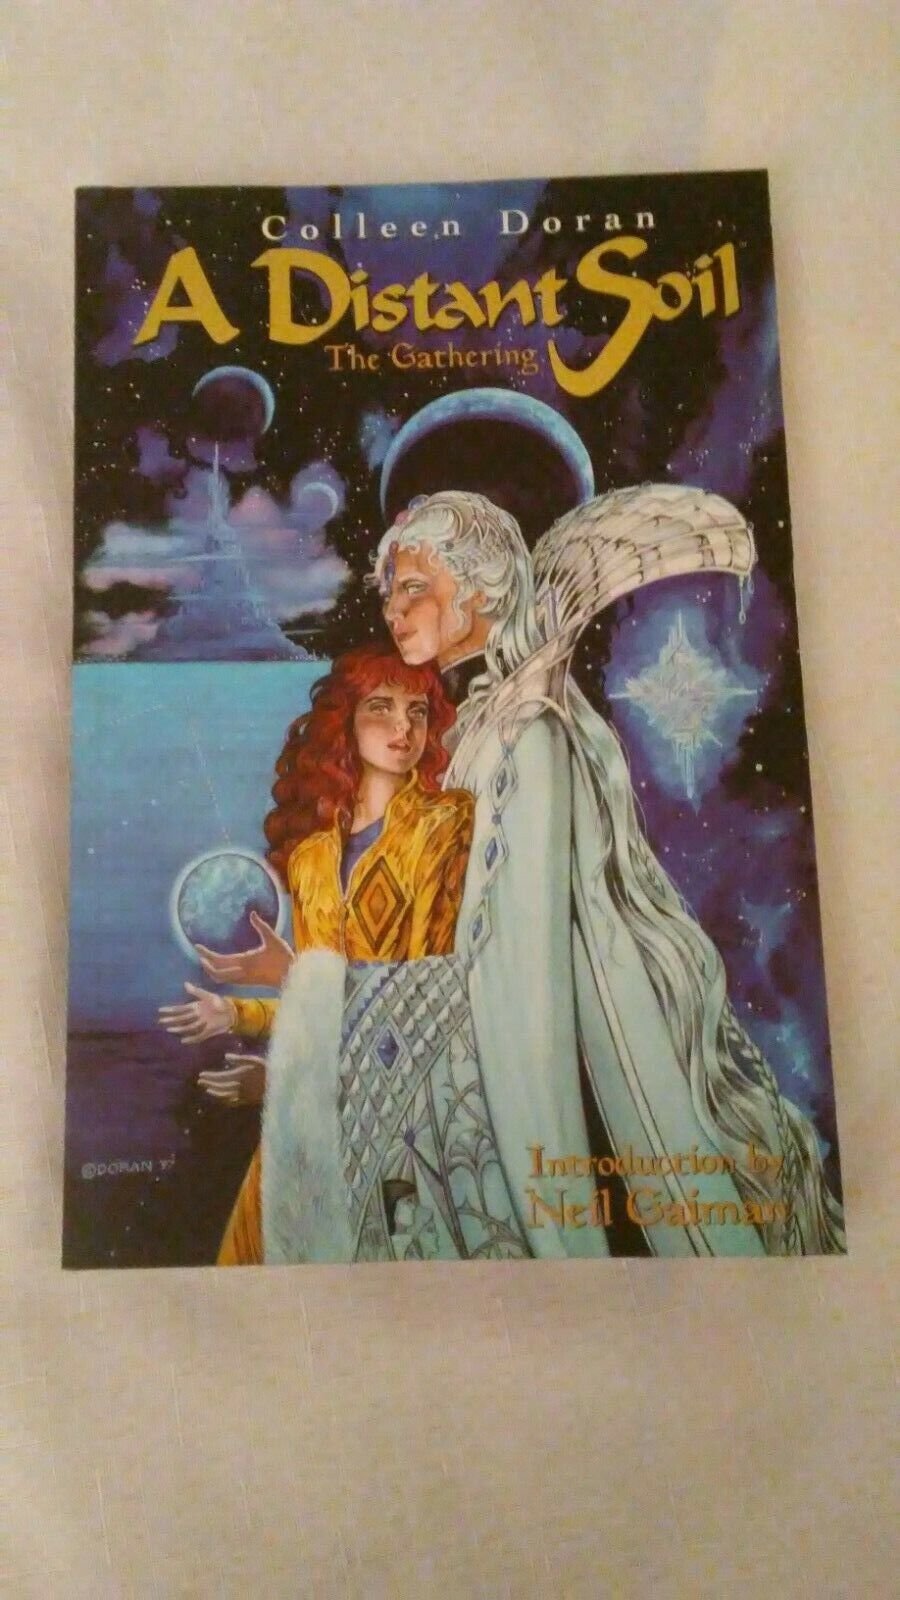 A Distant Soil-The Gathering TPB Colleen Doran, 1997 Introduction By Neil Gaiman